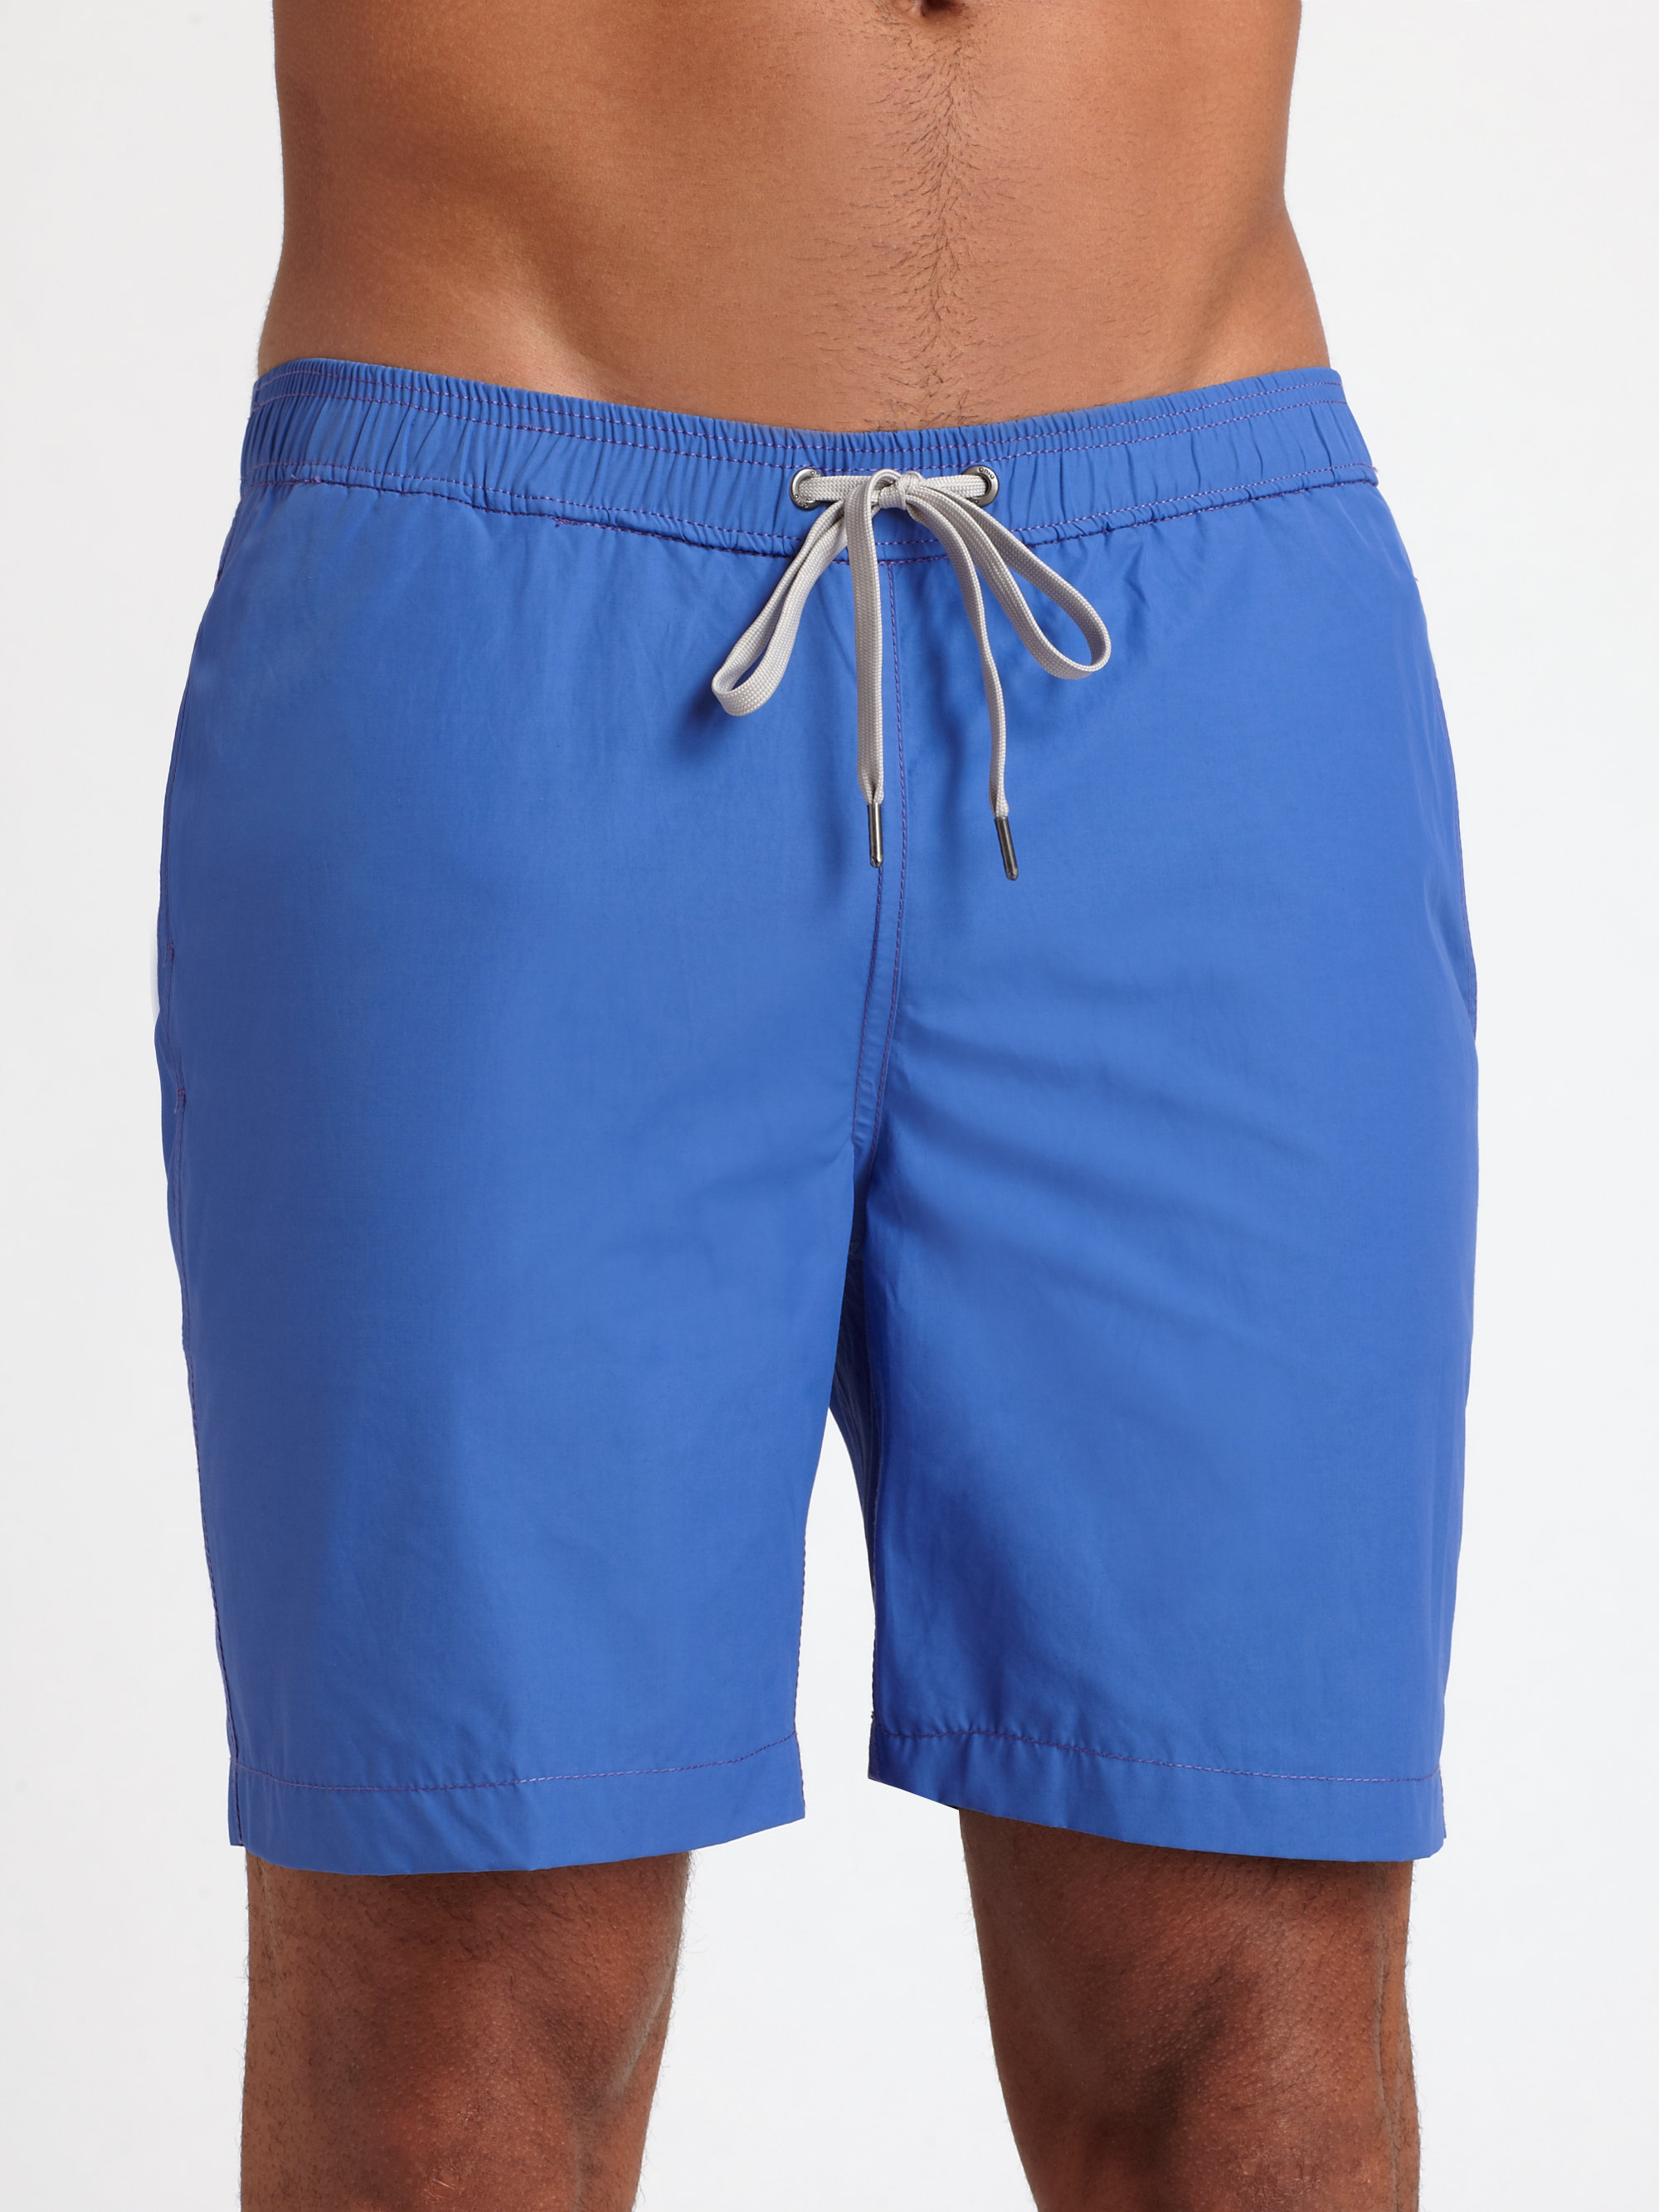 Onia Charles Solid Swim Trunks in Blue for Men - Lyst